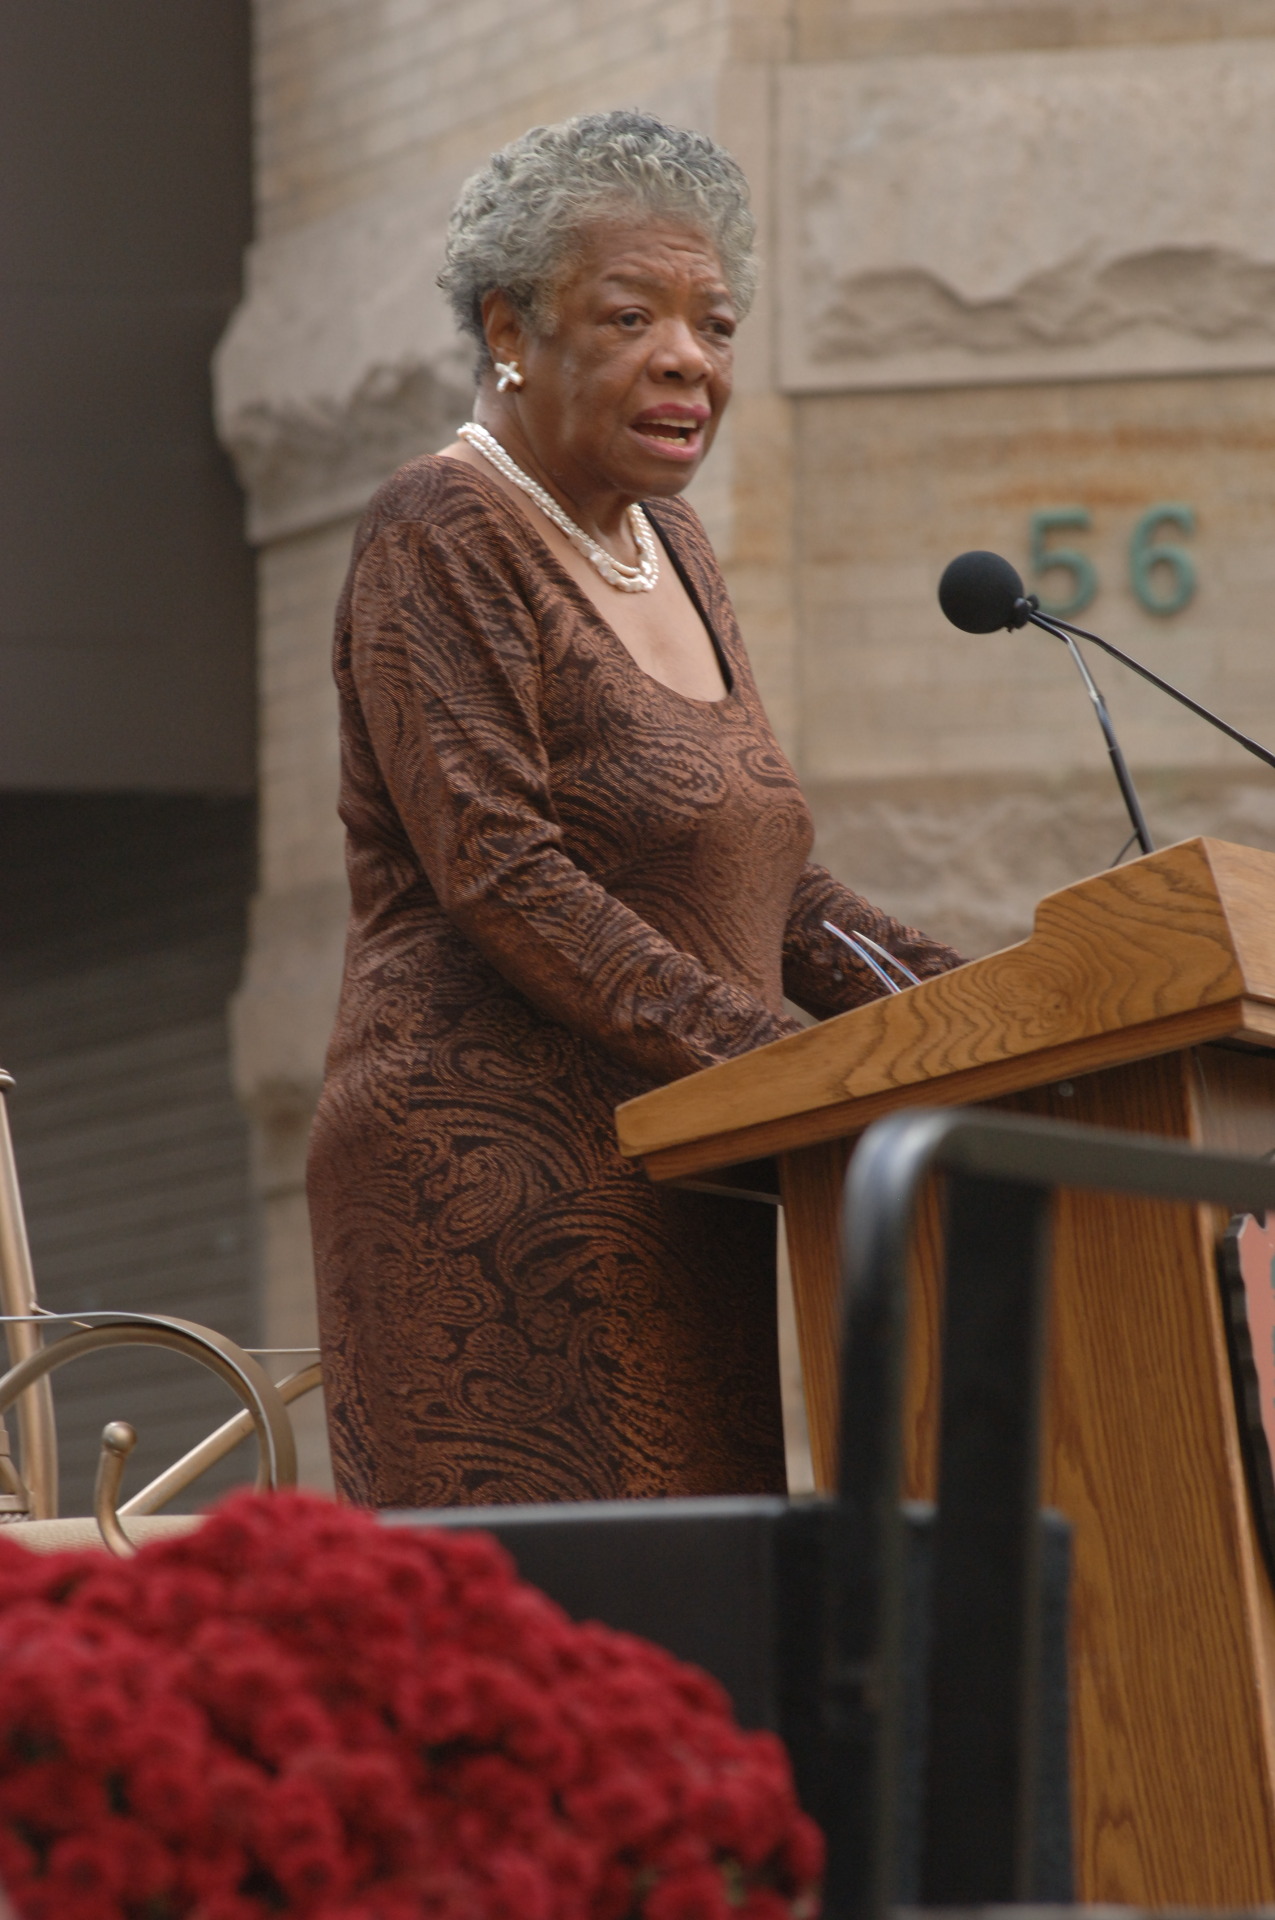 Fascinating Historical Picture of Maya Angelou  on 10/4/2007 